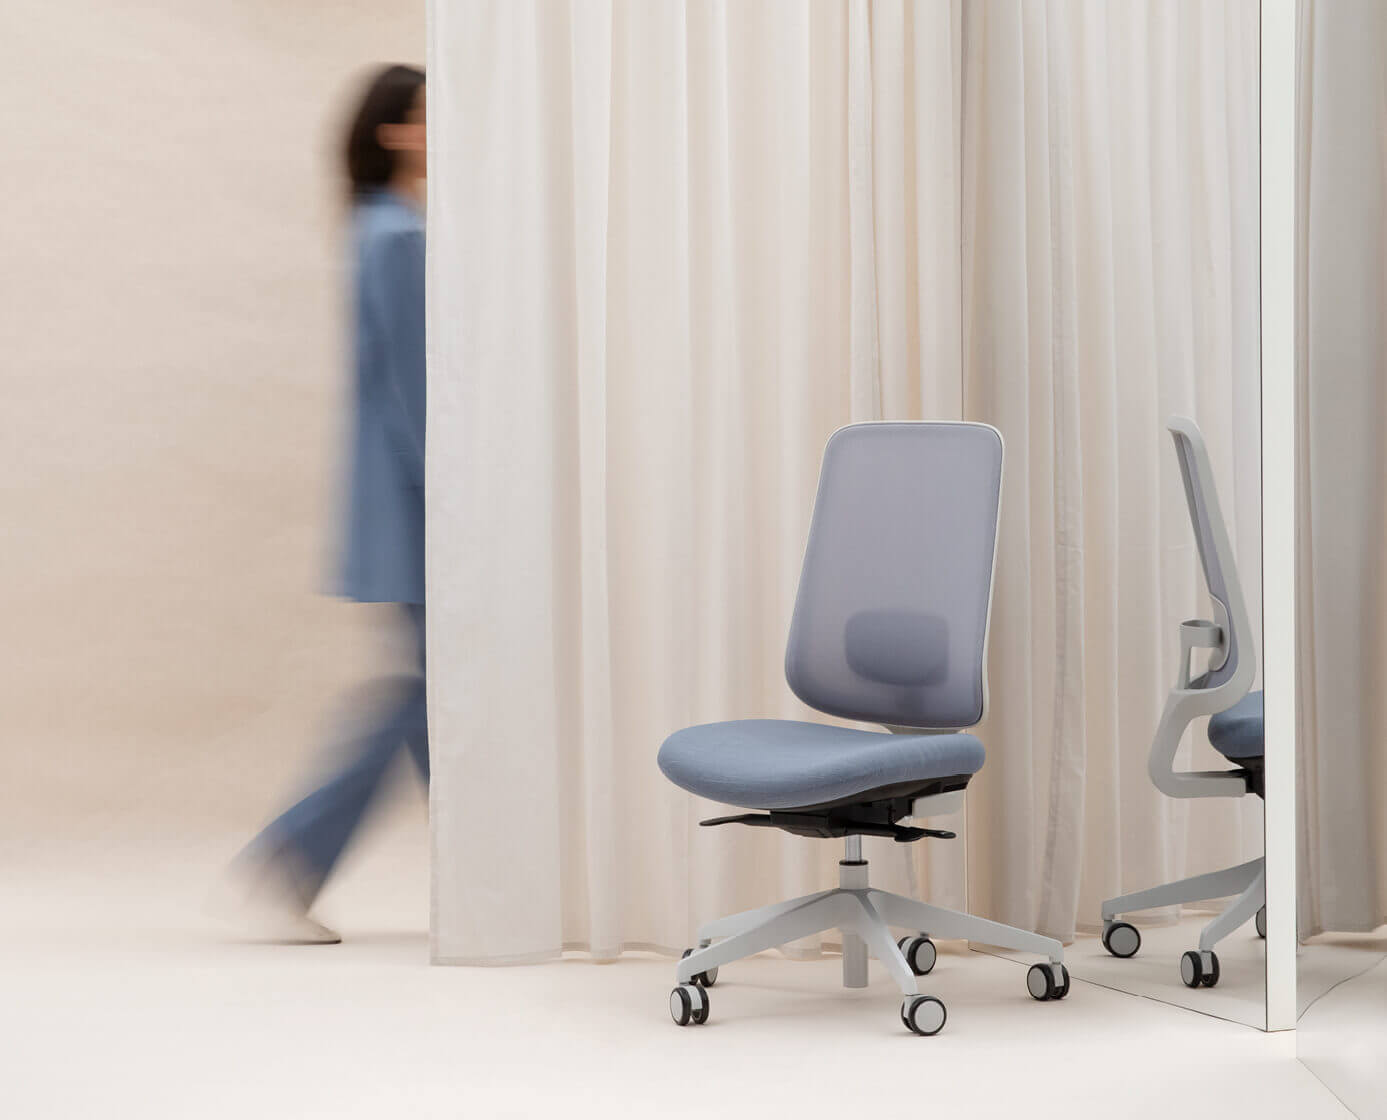 Task One Grey Frame Office Chair In Front Of A Mirror And Cream Curtain With Someone Walking Behind It